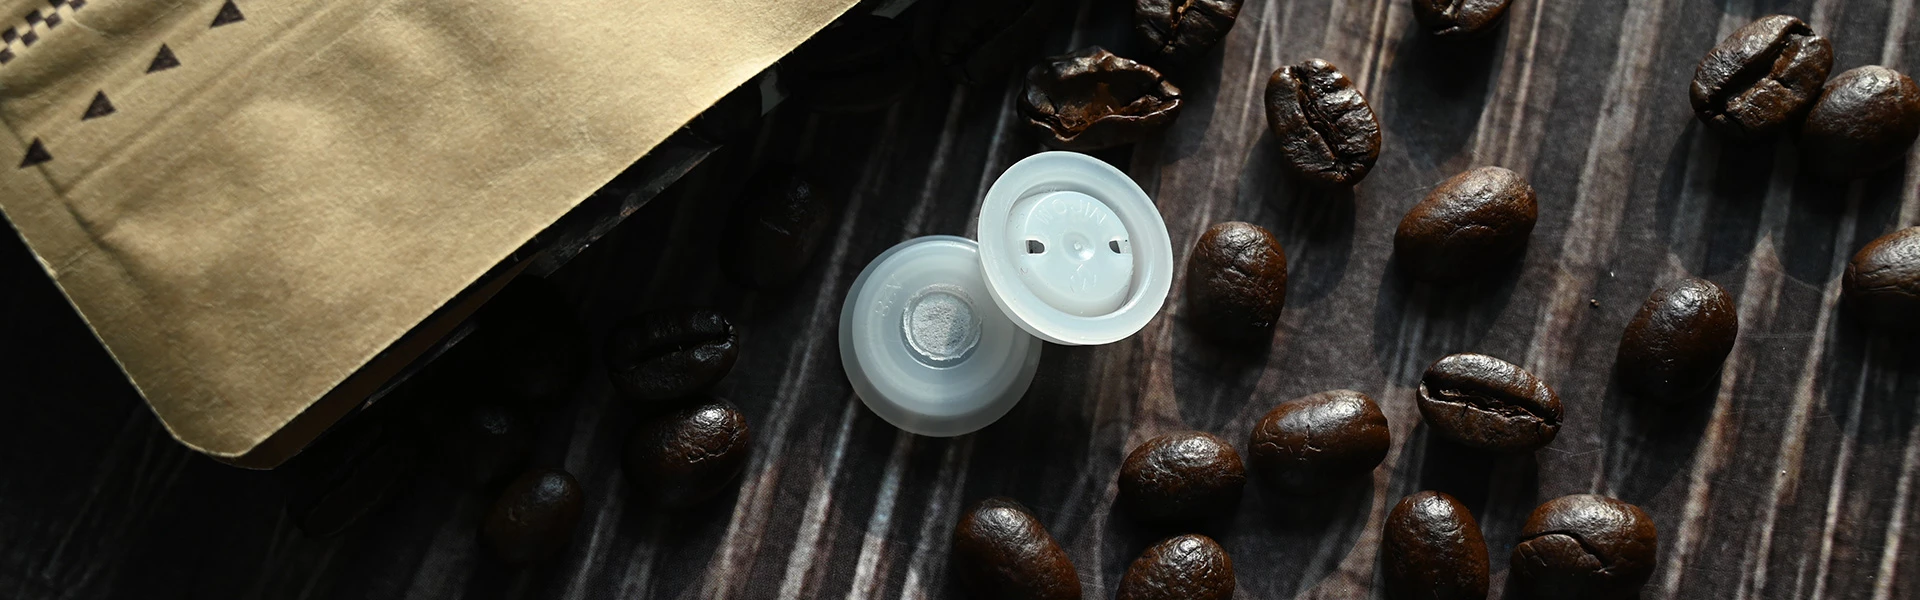 one way degassing valve roasted coffee beans